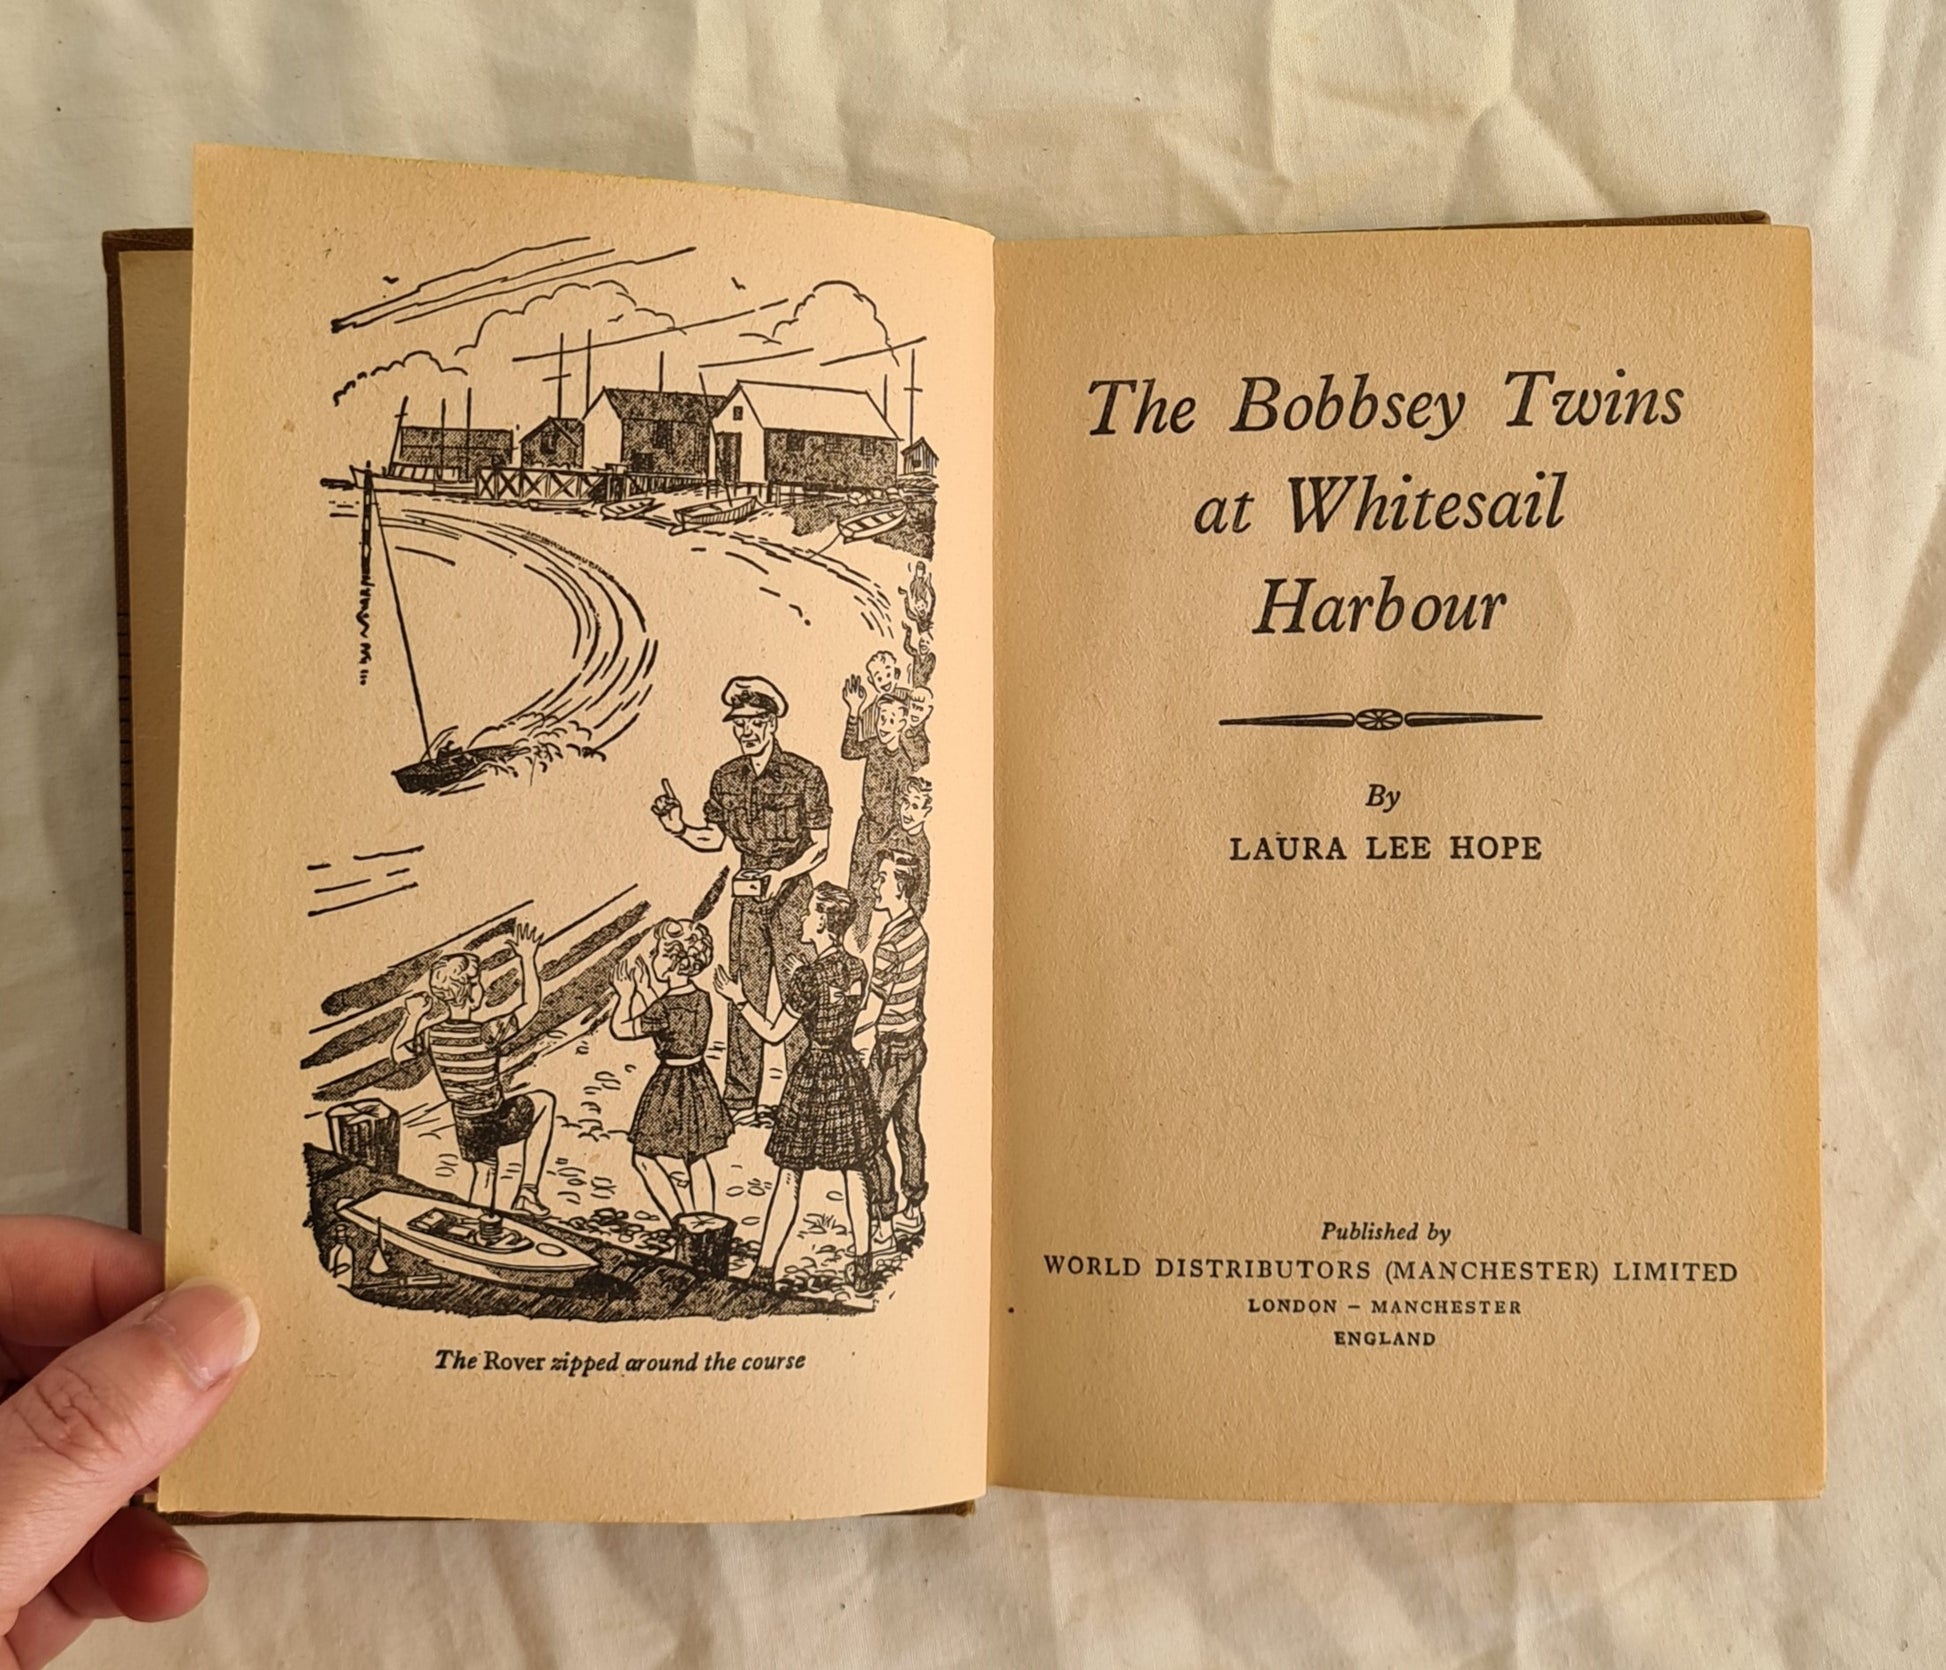 The Bobbsey Twins at Whitesail Harbour by Laura Lee Hope